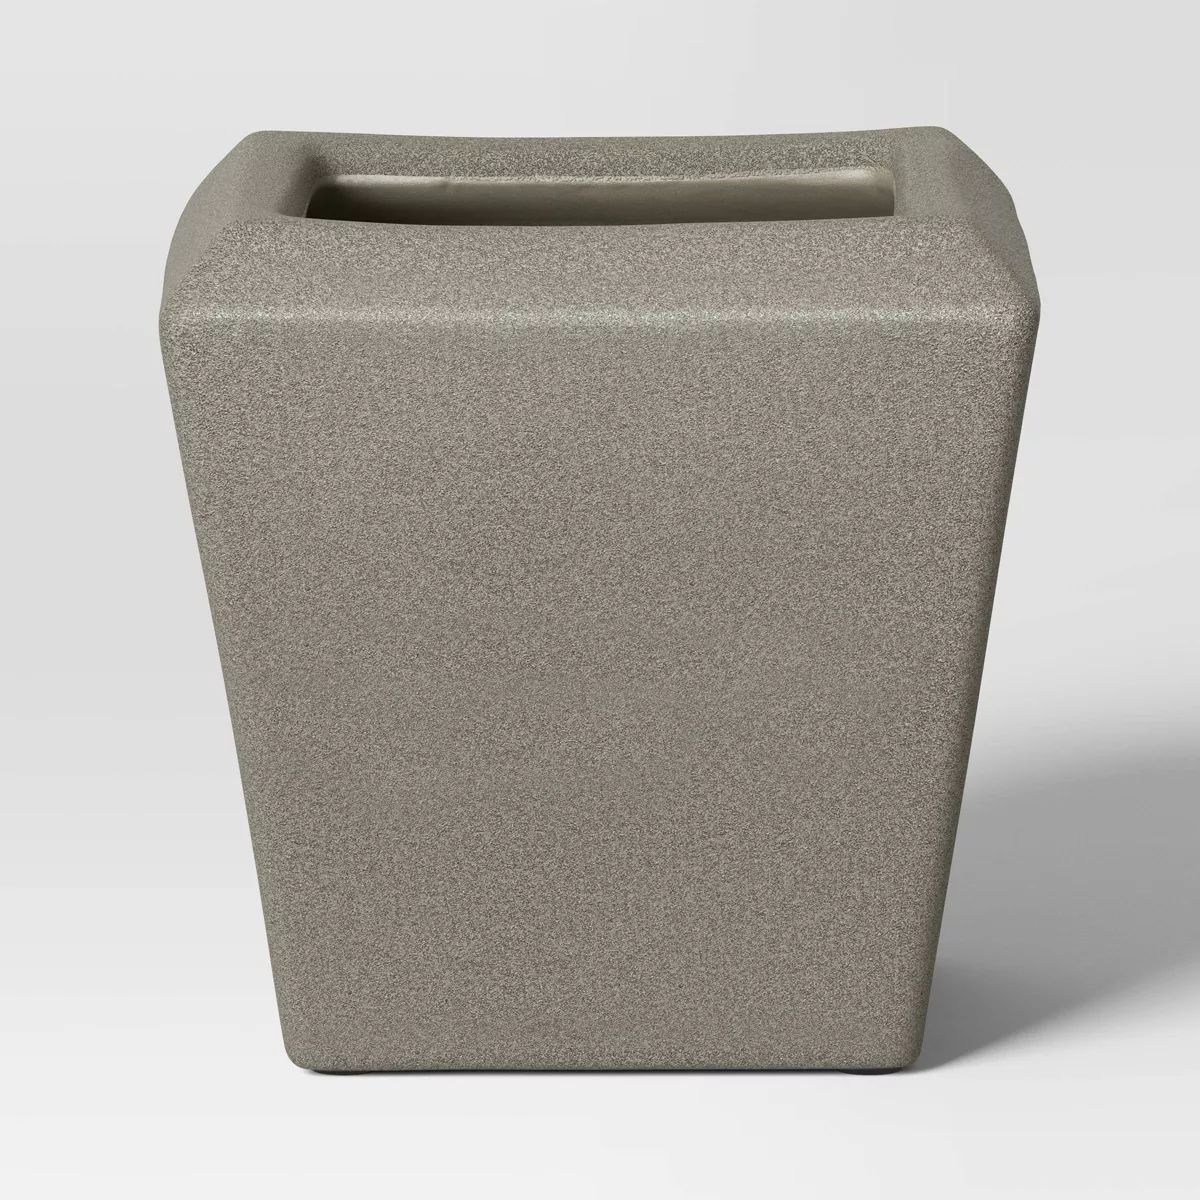 Large Square Ceramic Indoor Outdoor Planter Pot Charcoal Gray 9.84"x9.84" - Threshold™ designed... | Target